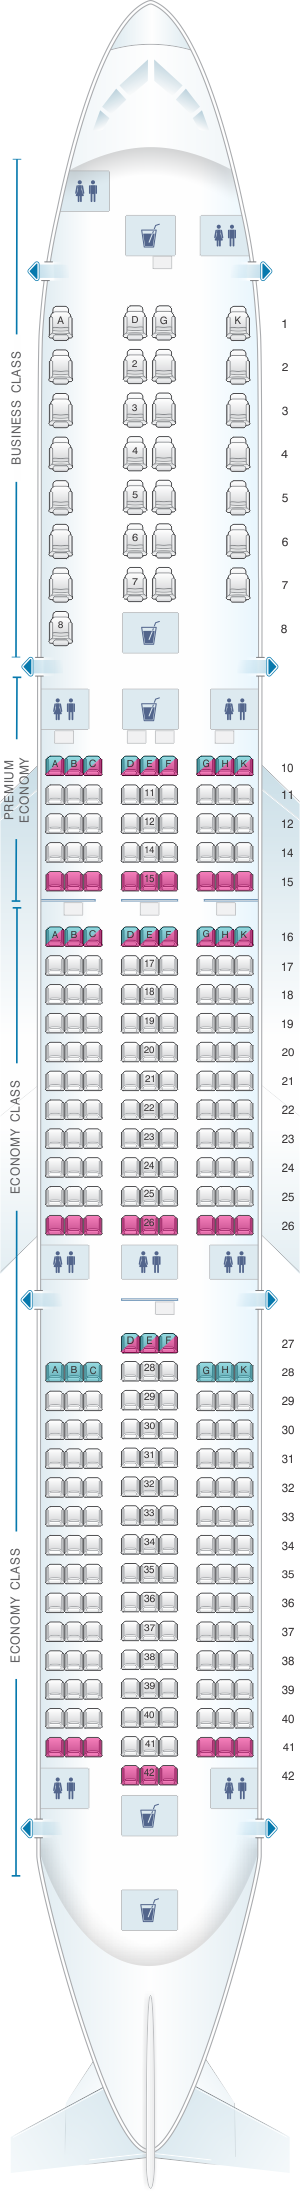 Seat map for Vietnam Airlines Airbus A350 Config.1